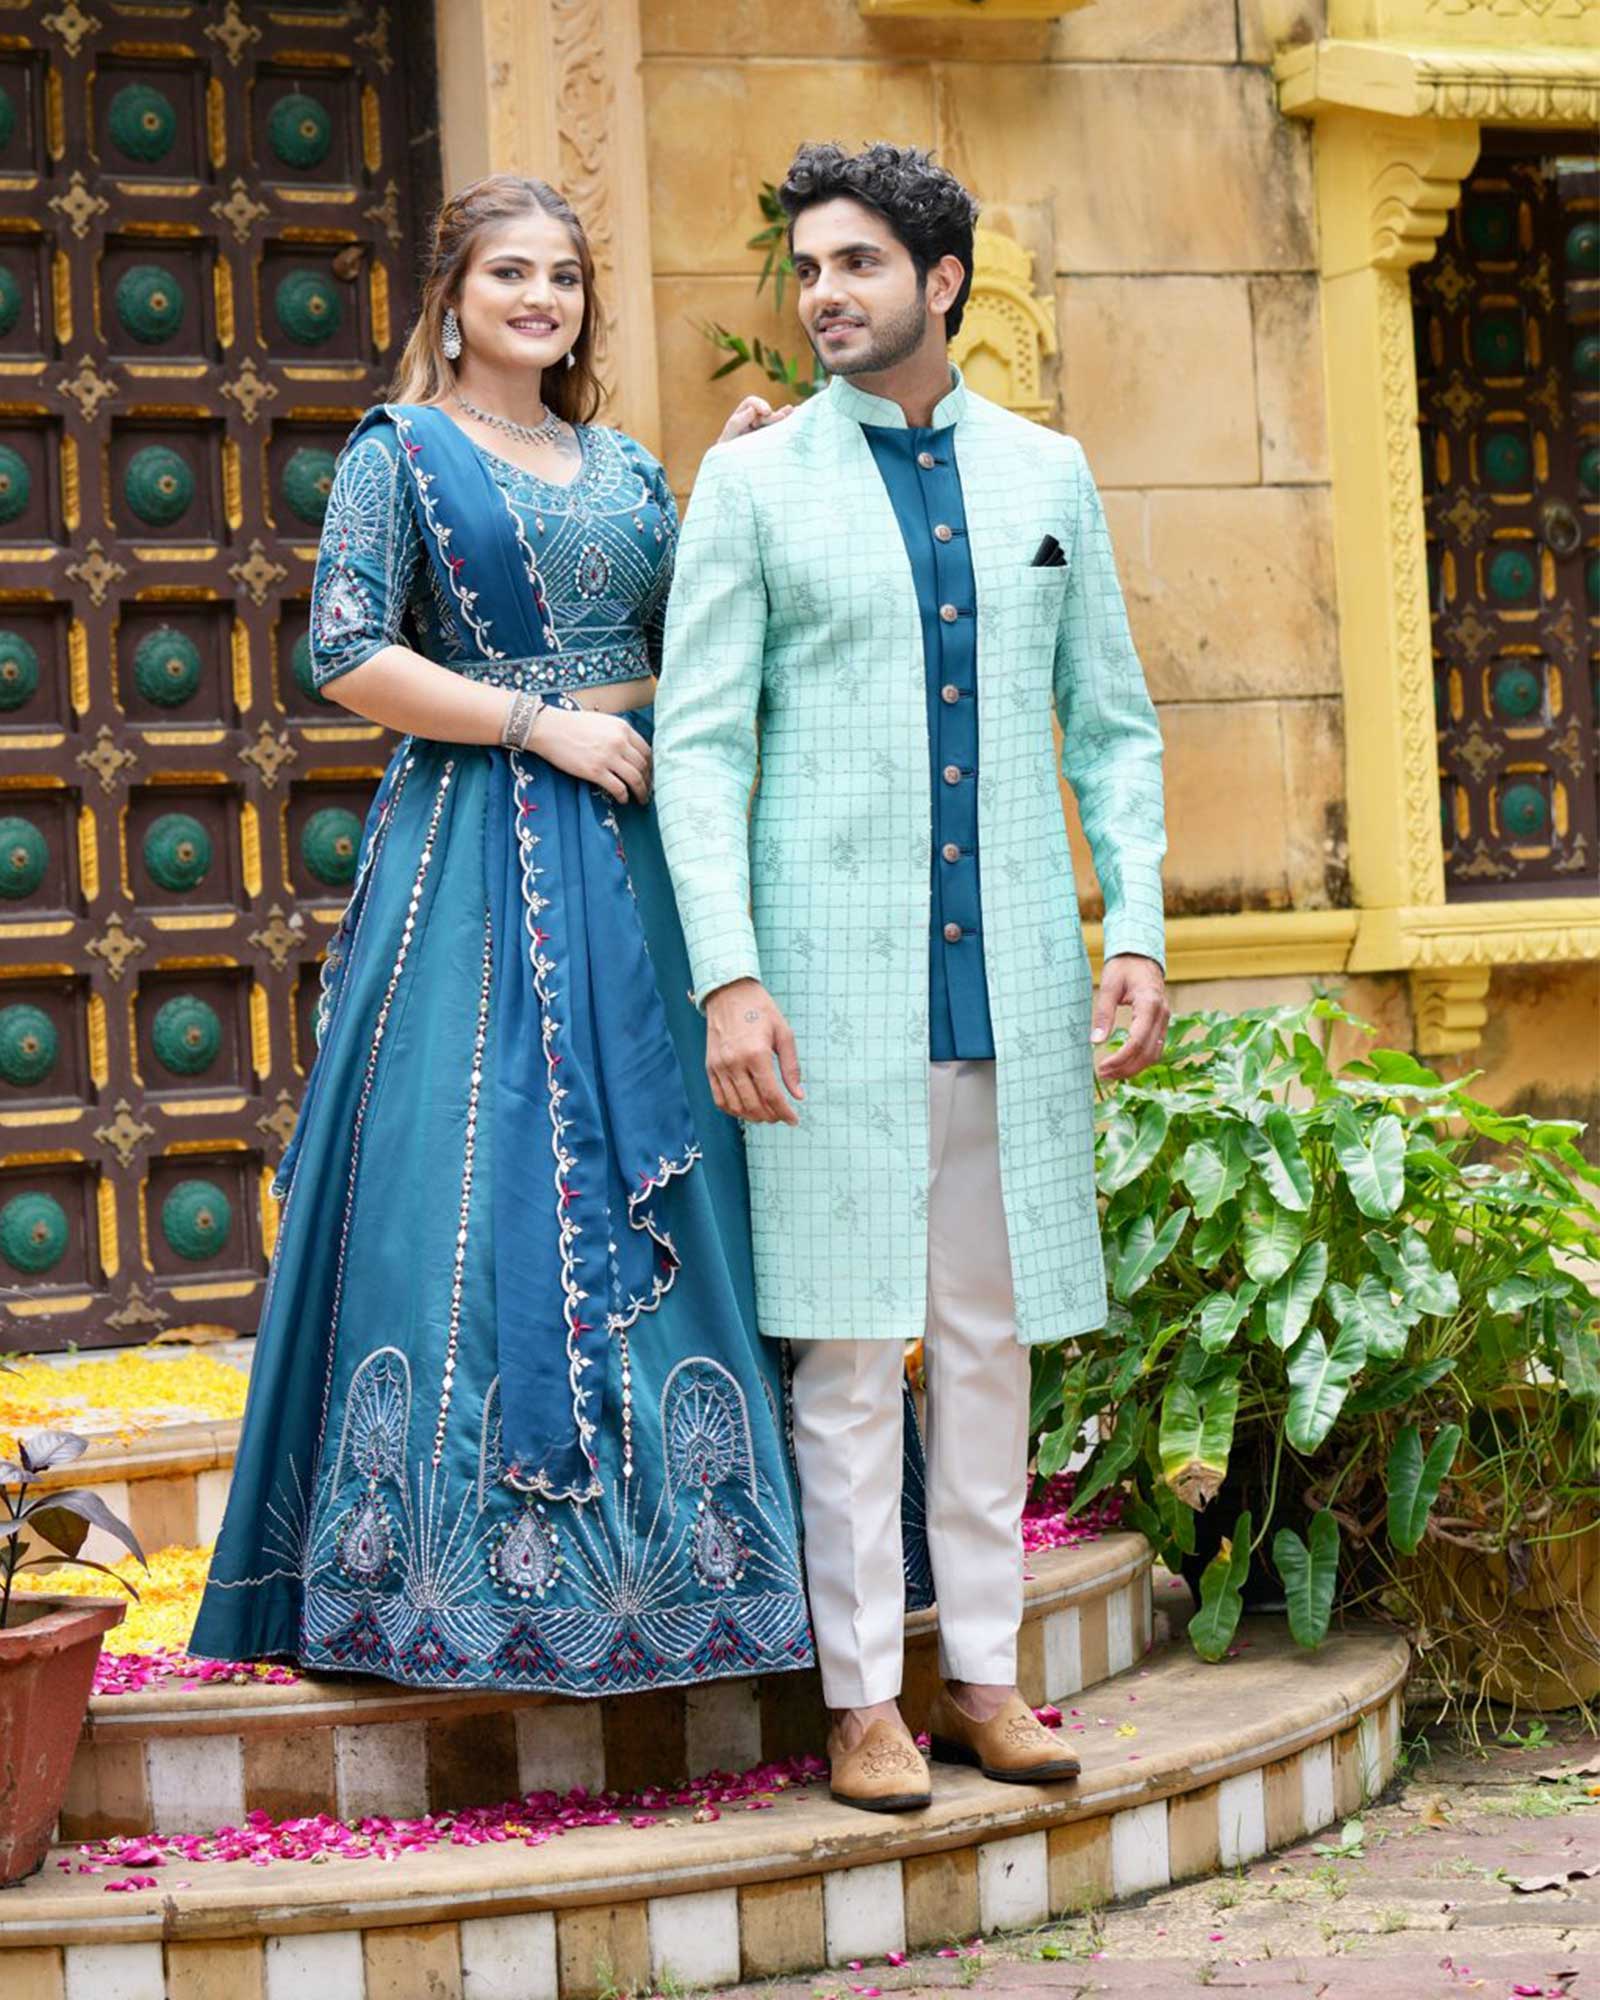 South Indian reception picture | Indian wedding outfit bride, Wedding  reception outfit, Couple wedding dress